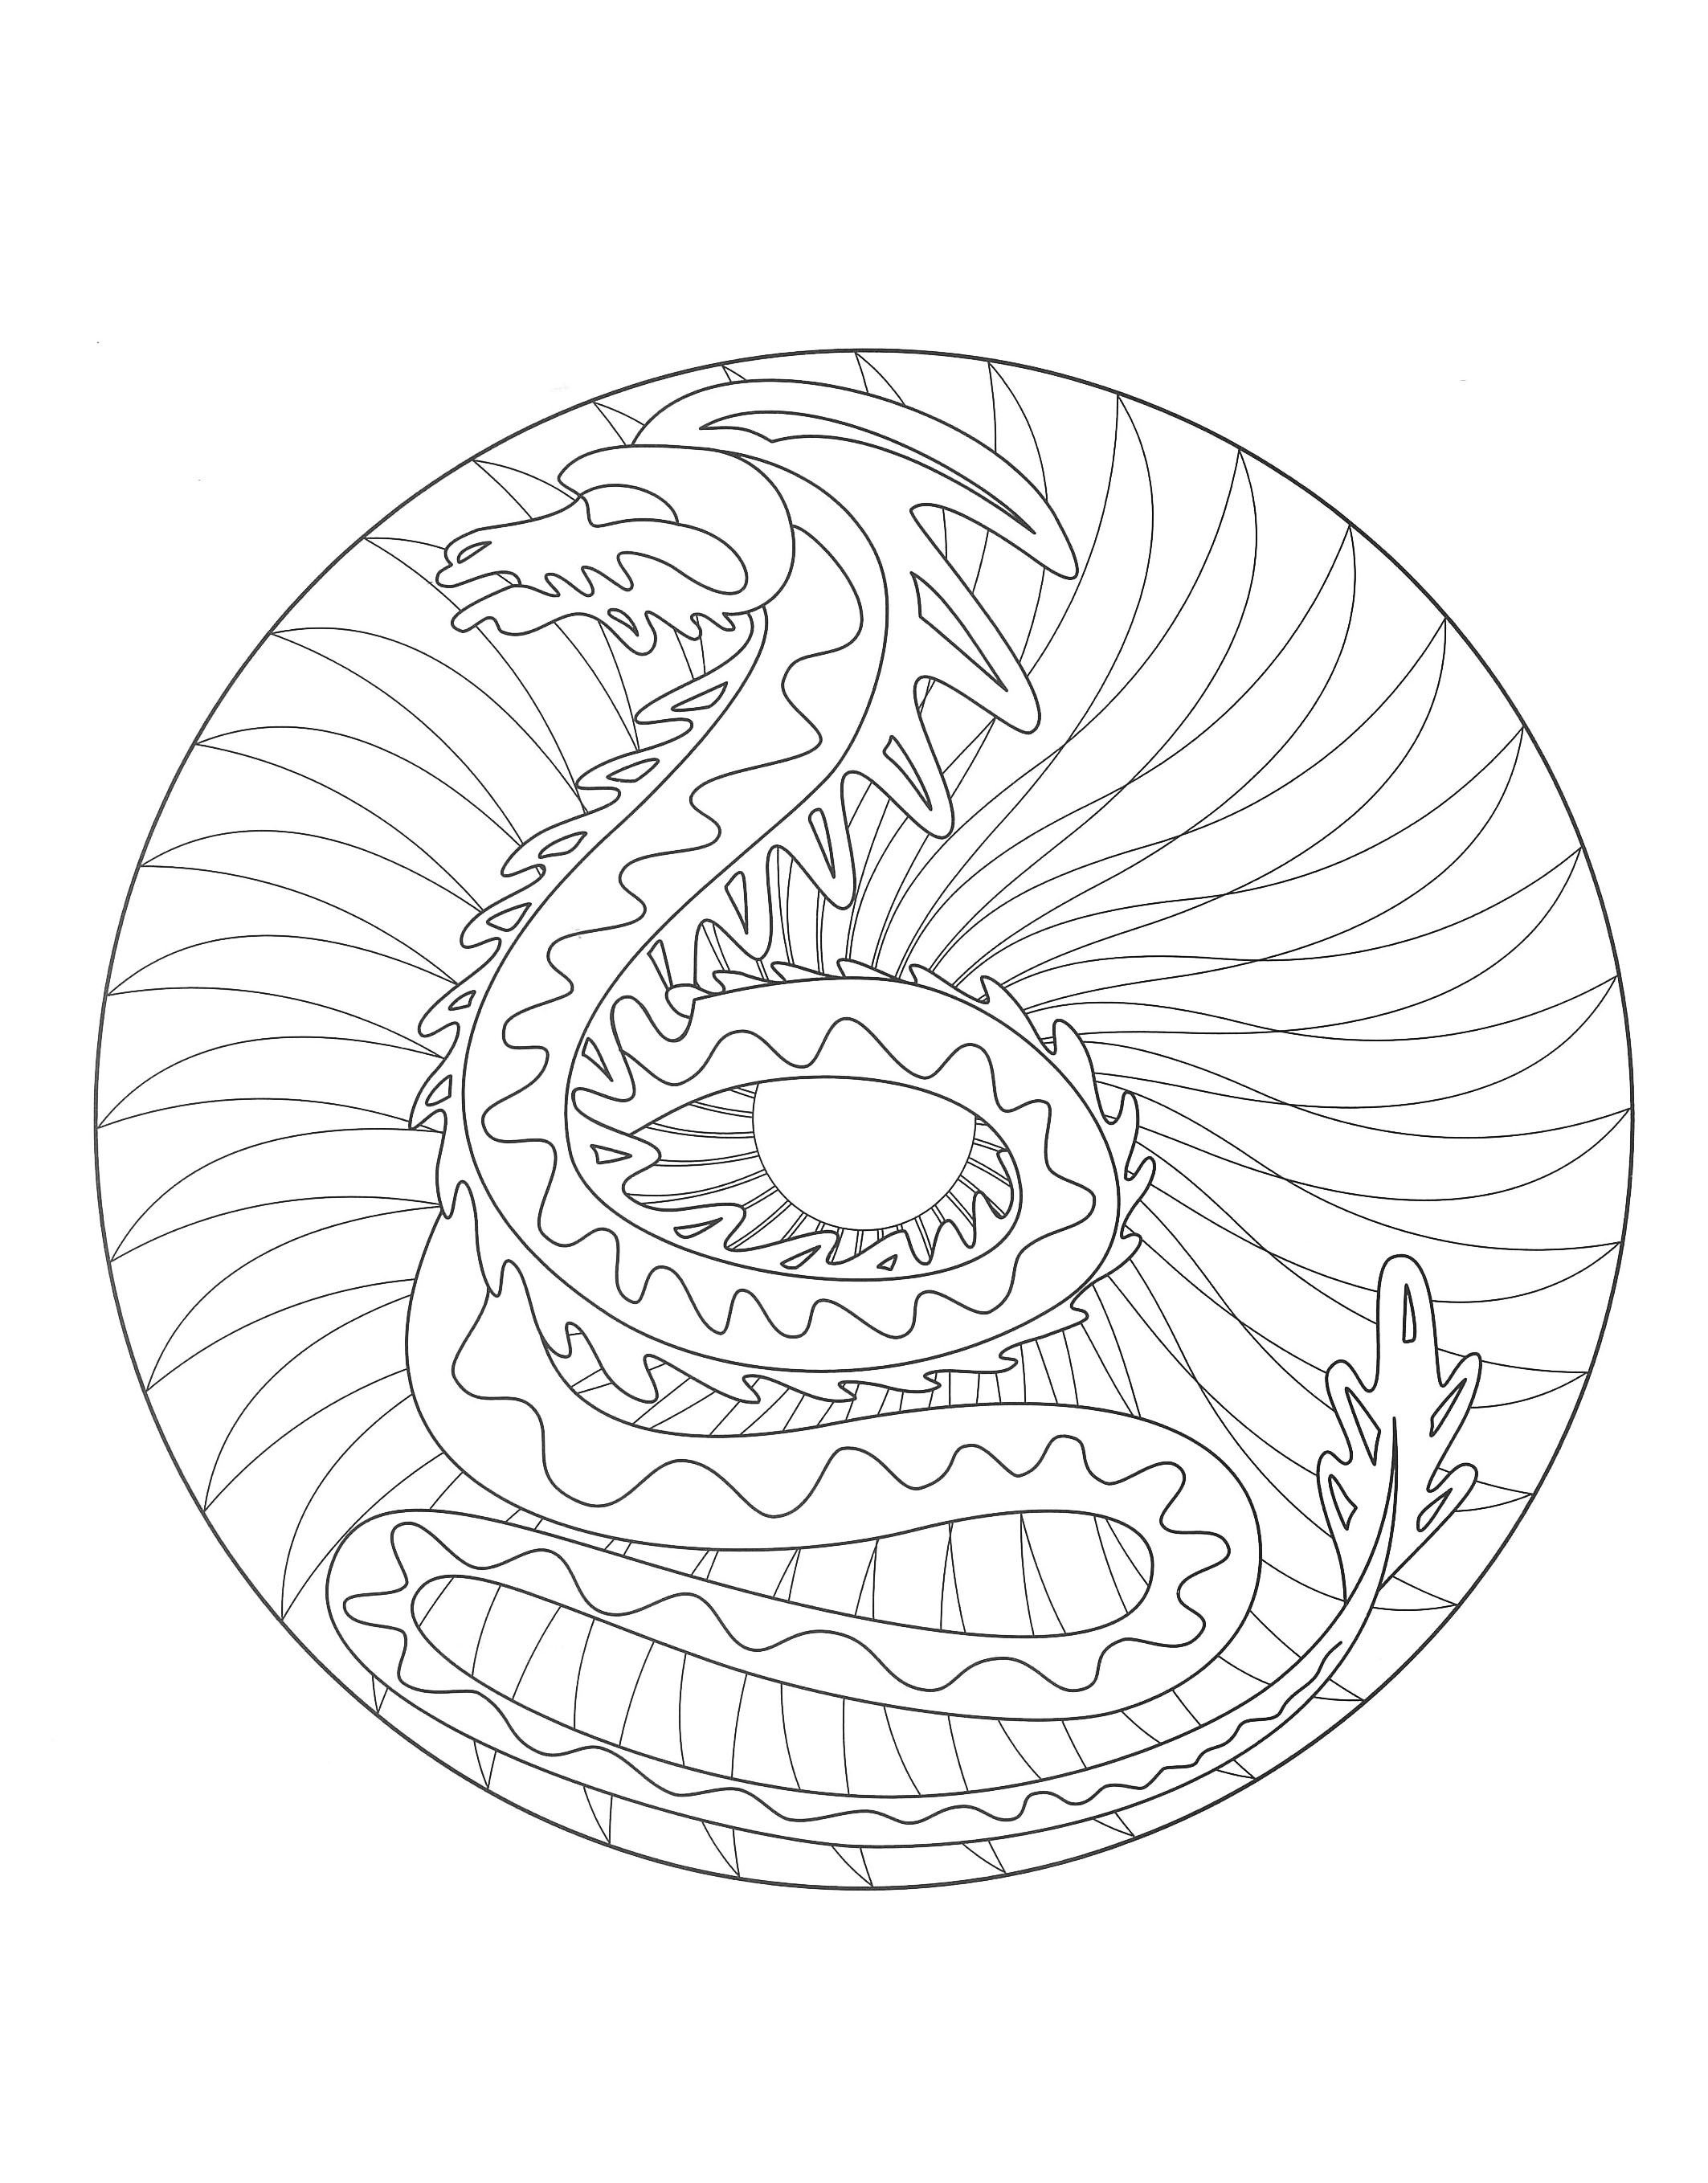 Dragon Mandala Coloring page to print & color. Get ready for a relaxing moment with this beautiful Mandala coloring page composed of this imaginary creature.